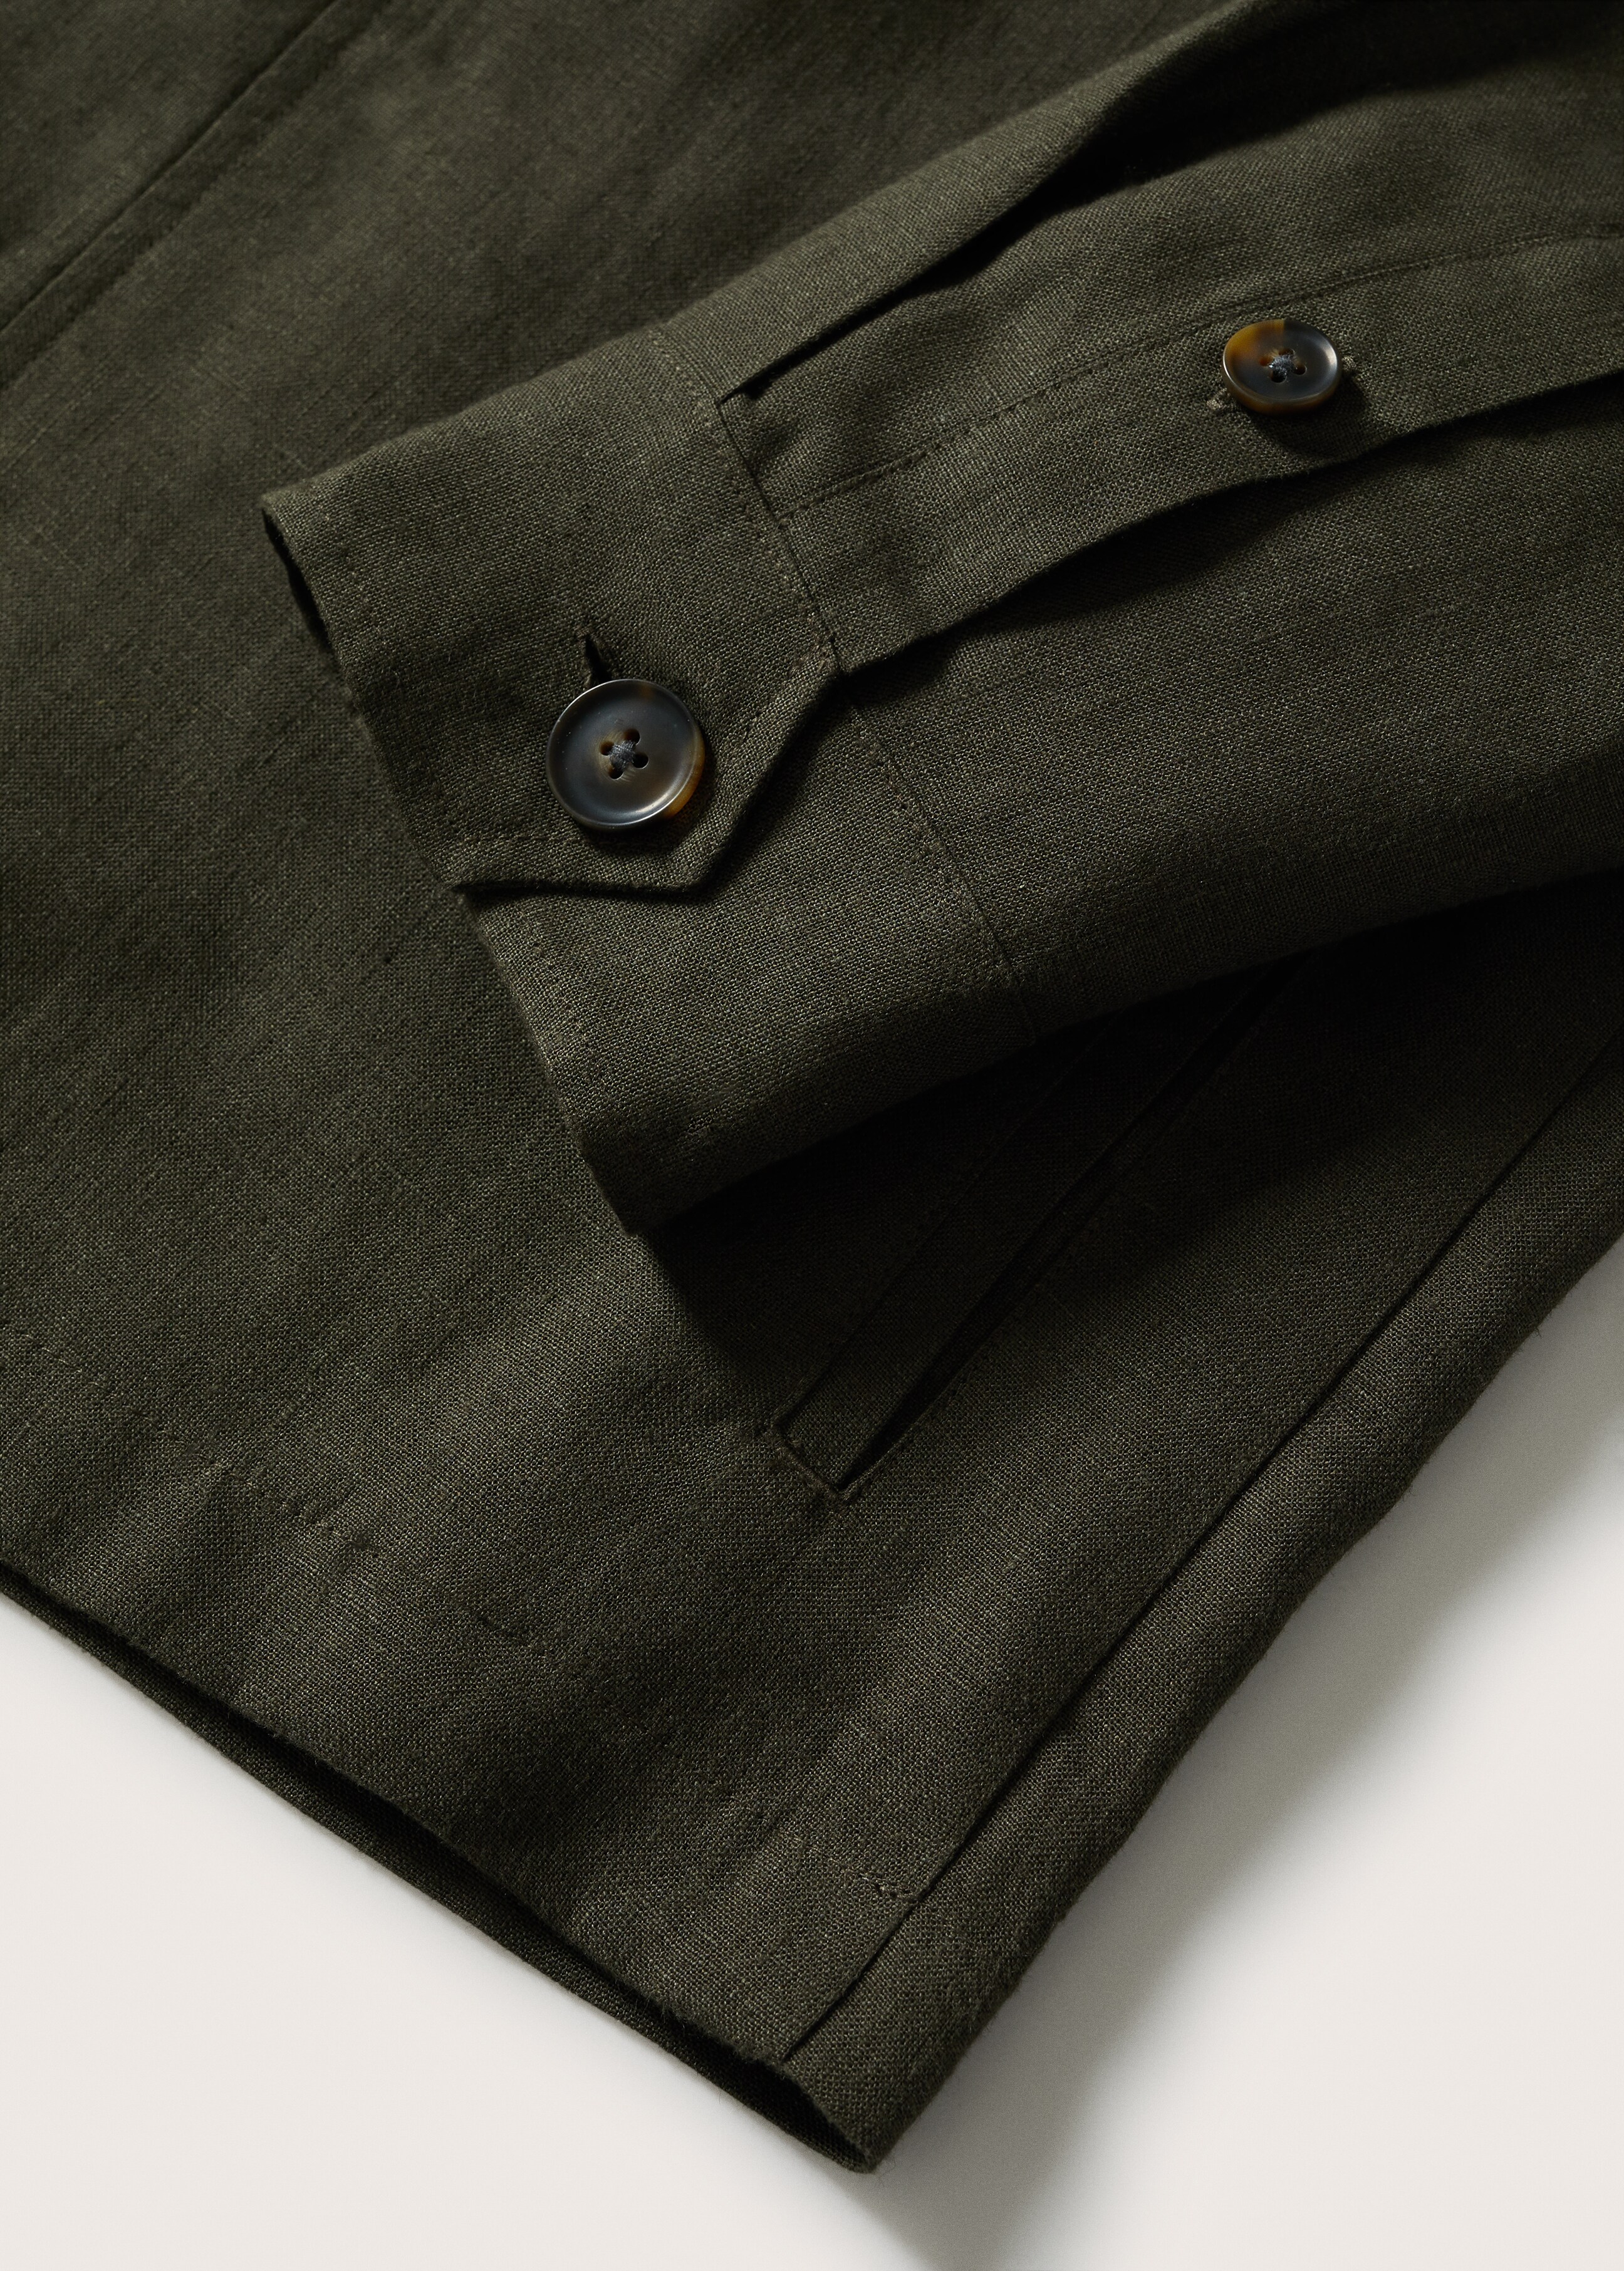 100% linen overshirt with pockets - Details of the article 8